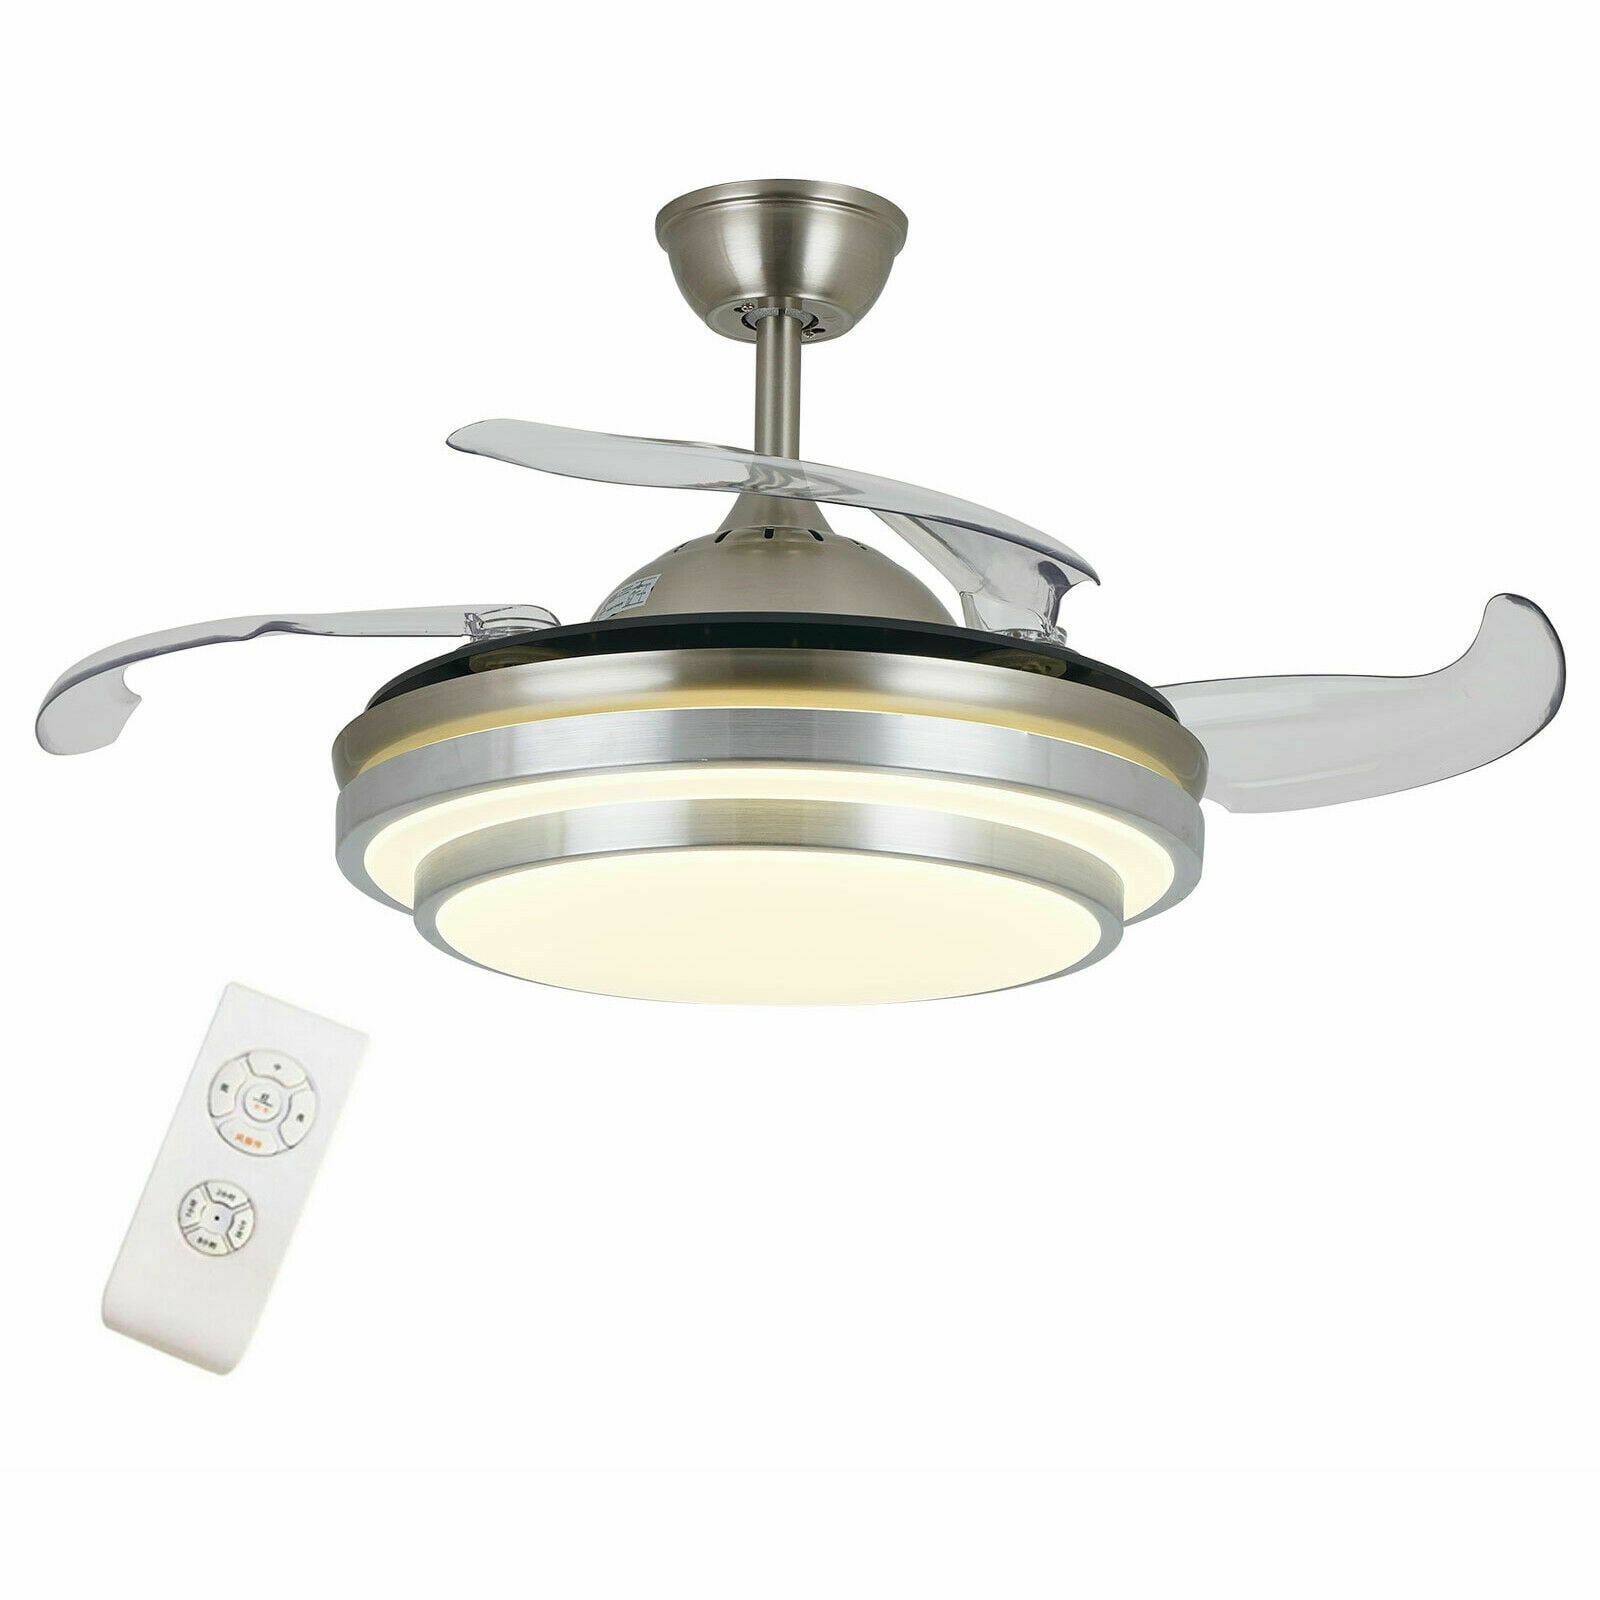 42"Inch Stainless Steel Ceiling Fan Light Lamp Remote Control Fixtures US Ship 